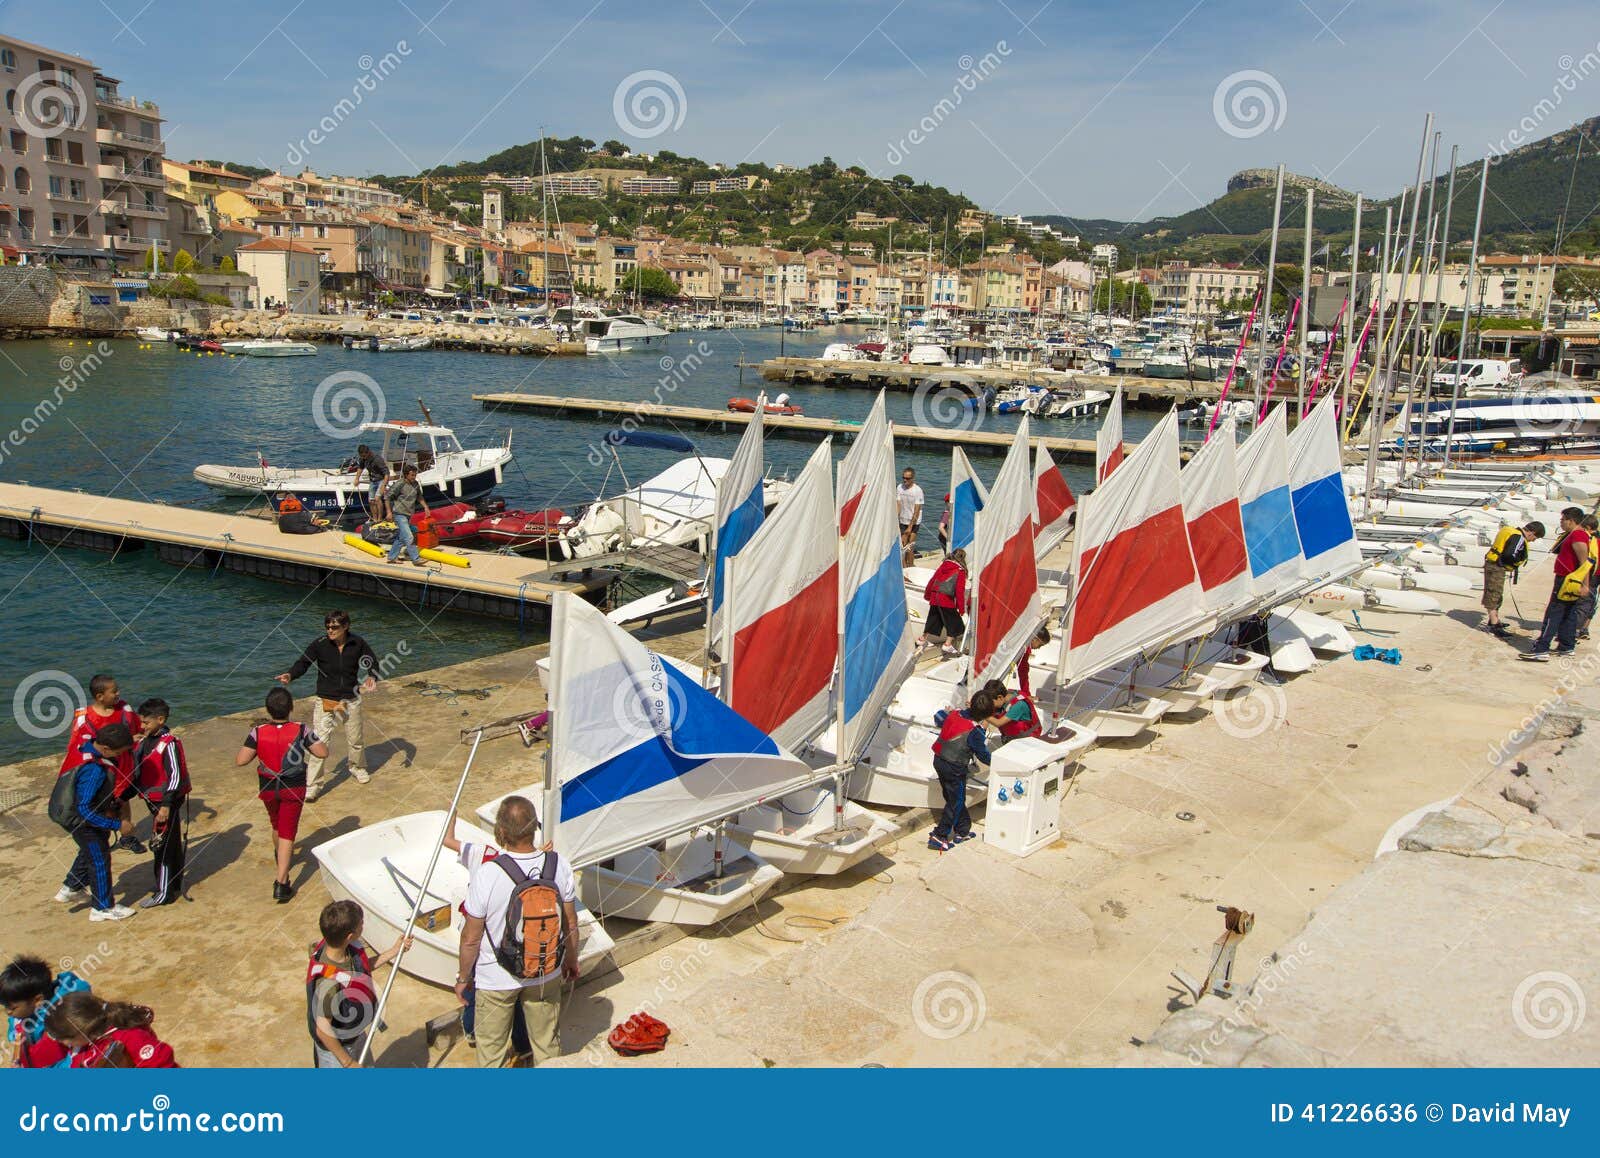 Sailing School Cassis editorial photo. Image of europe - 41226636